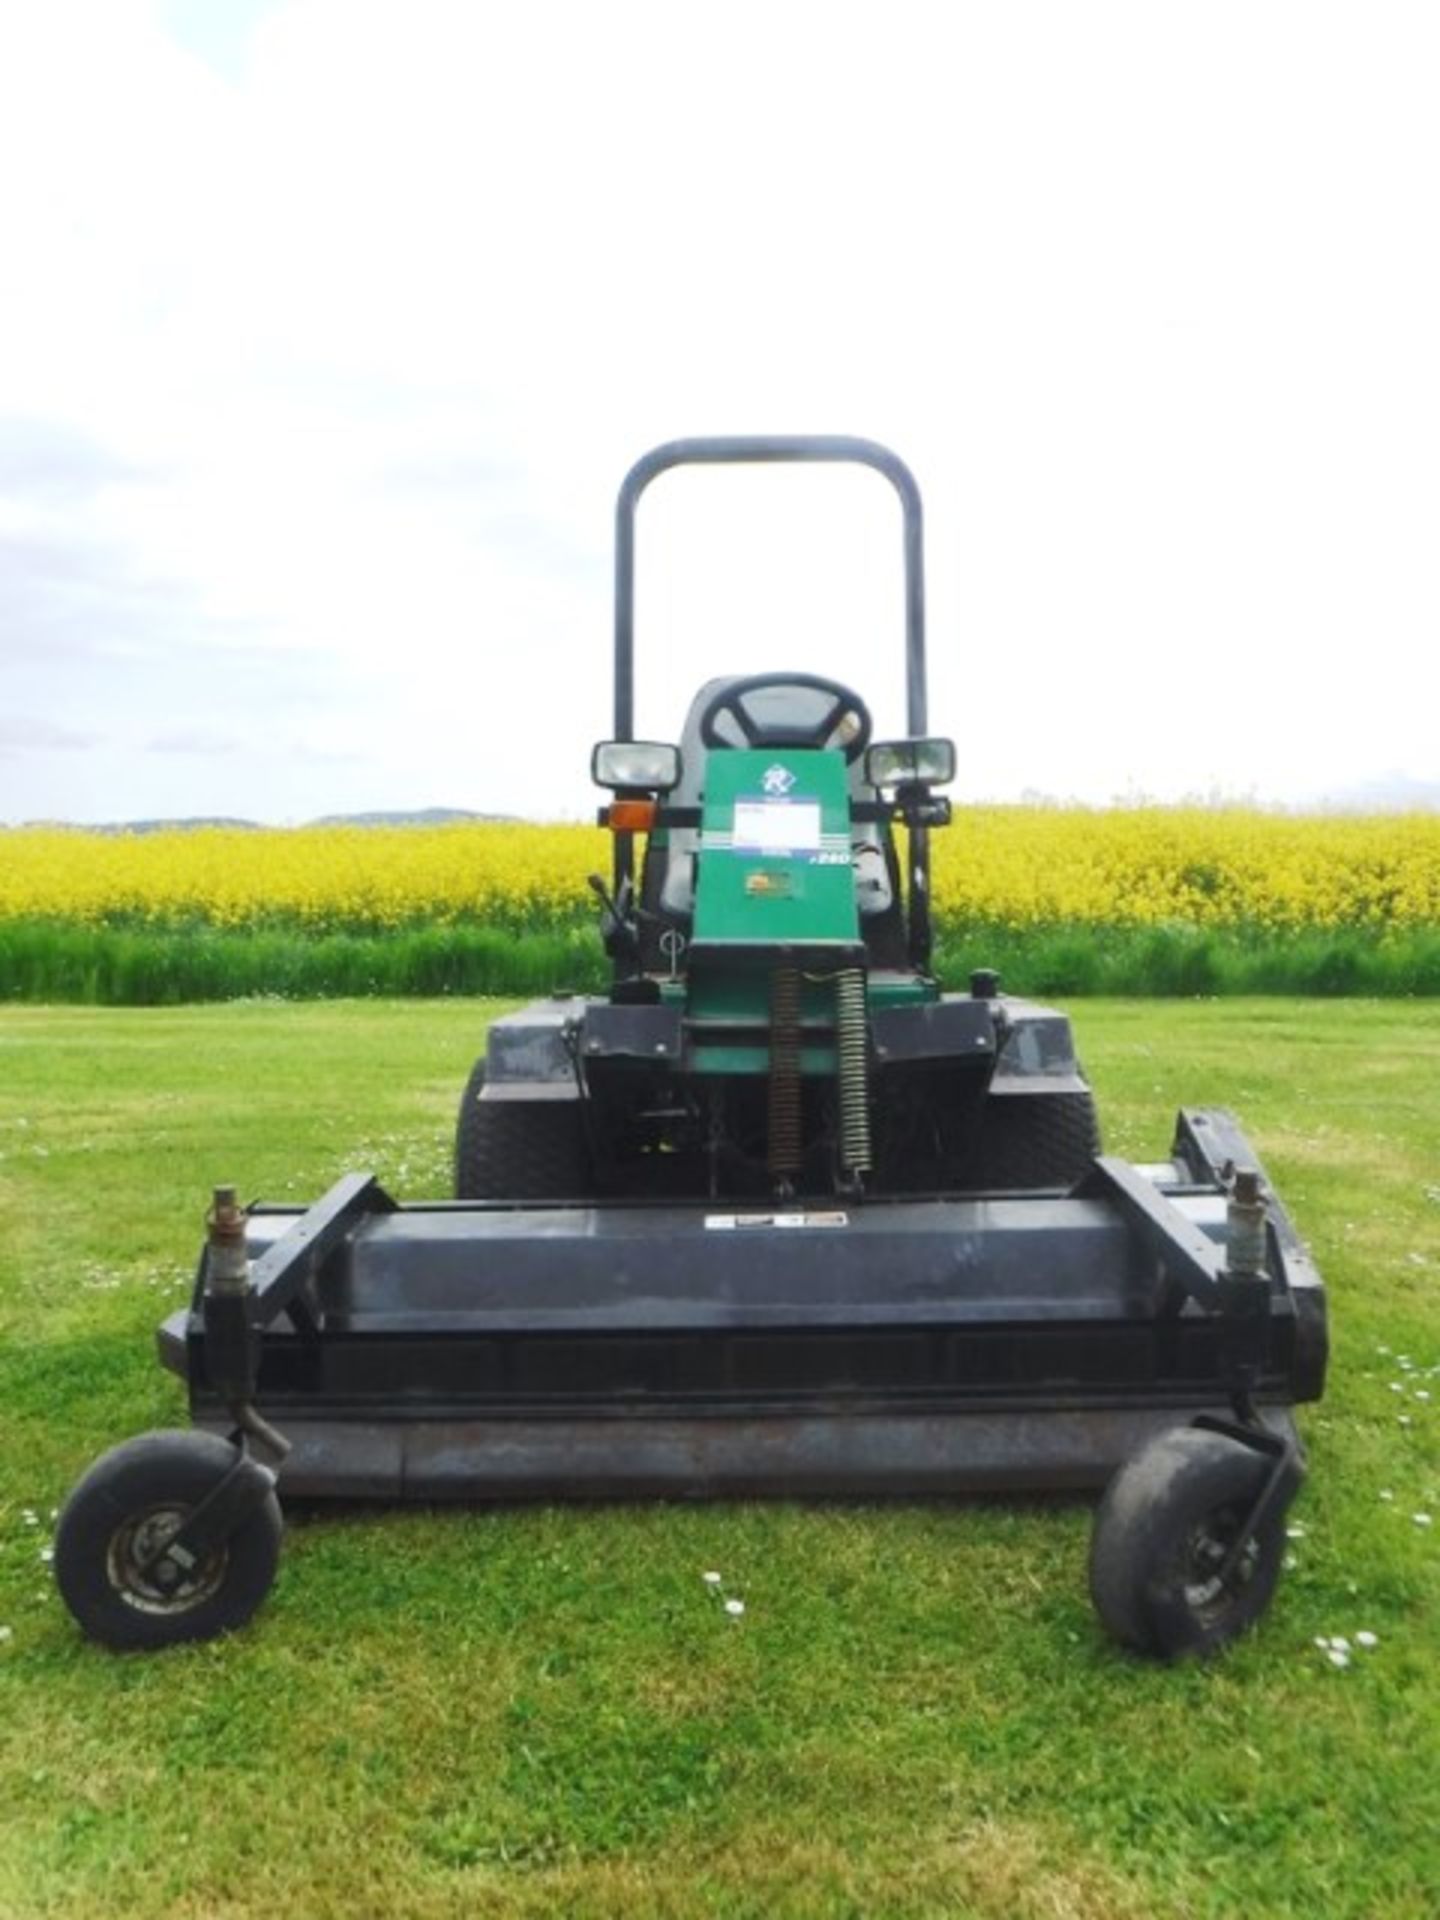 RANSOMES FRONT LINE 7280 ride on mower. Reg - Y106BSX. 4029hrs (not verified) - Image 6 of 13